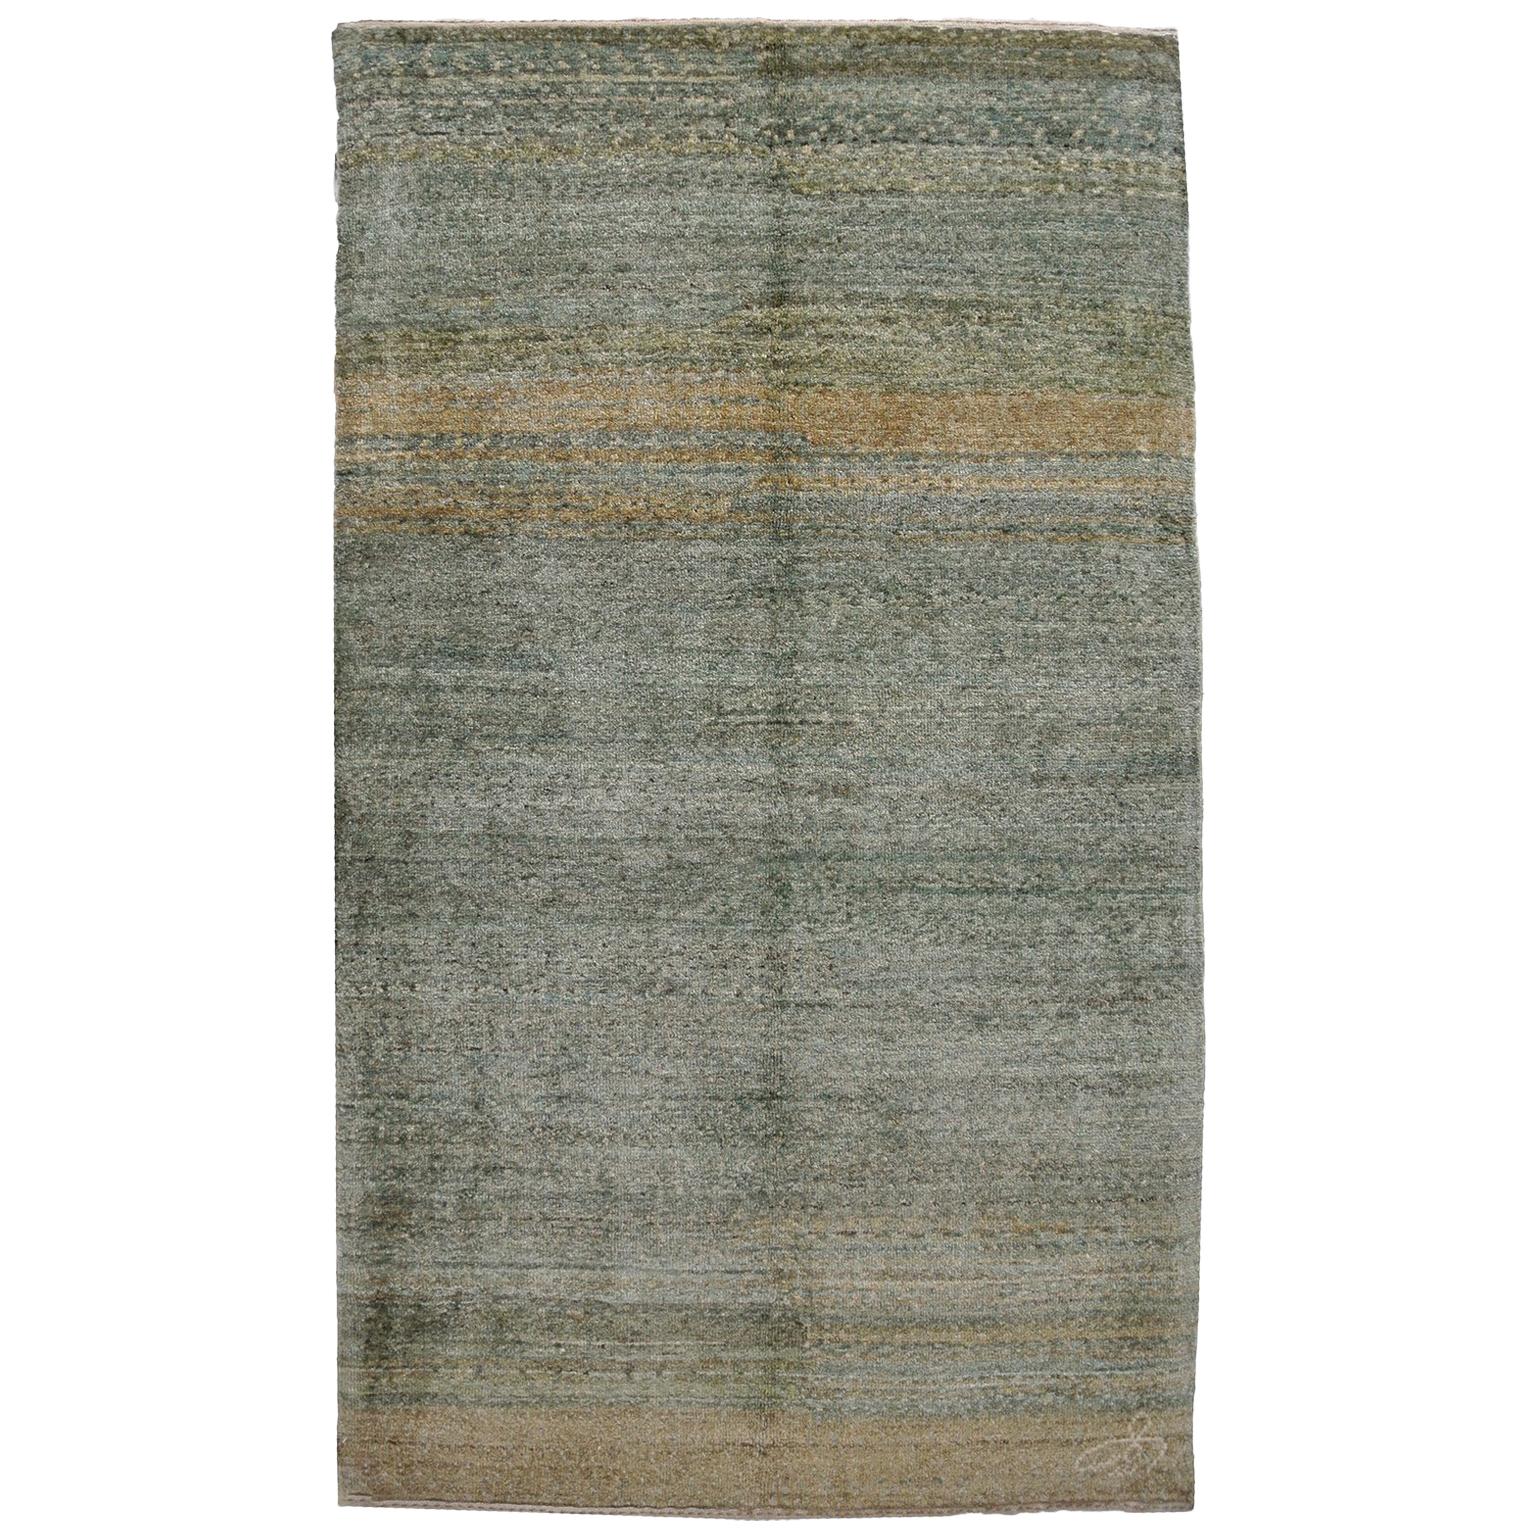 Orley Shabahang "Dissolve" Contemporary Persian Rug, Green, Yellow Wool, 3' x 4' For Sale